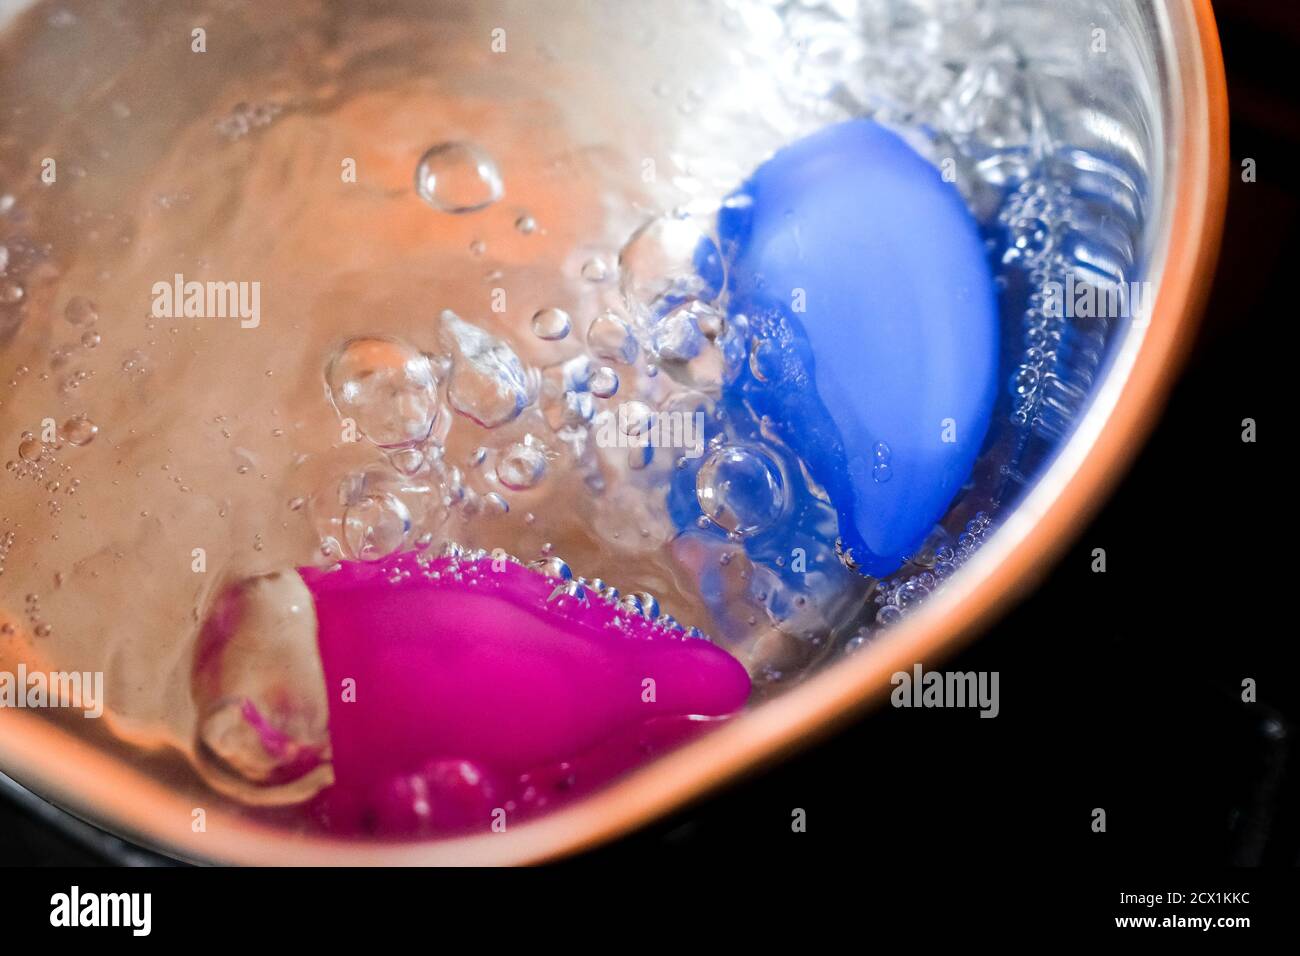 Boil the menstrual cups in a saucepan. bubbles visible Stock Photo - Alamy